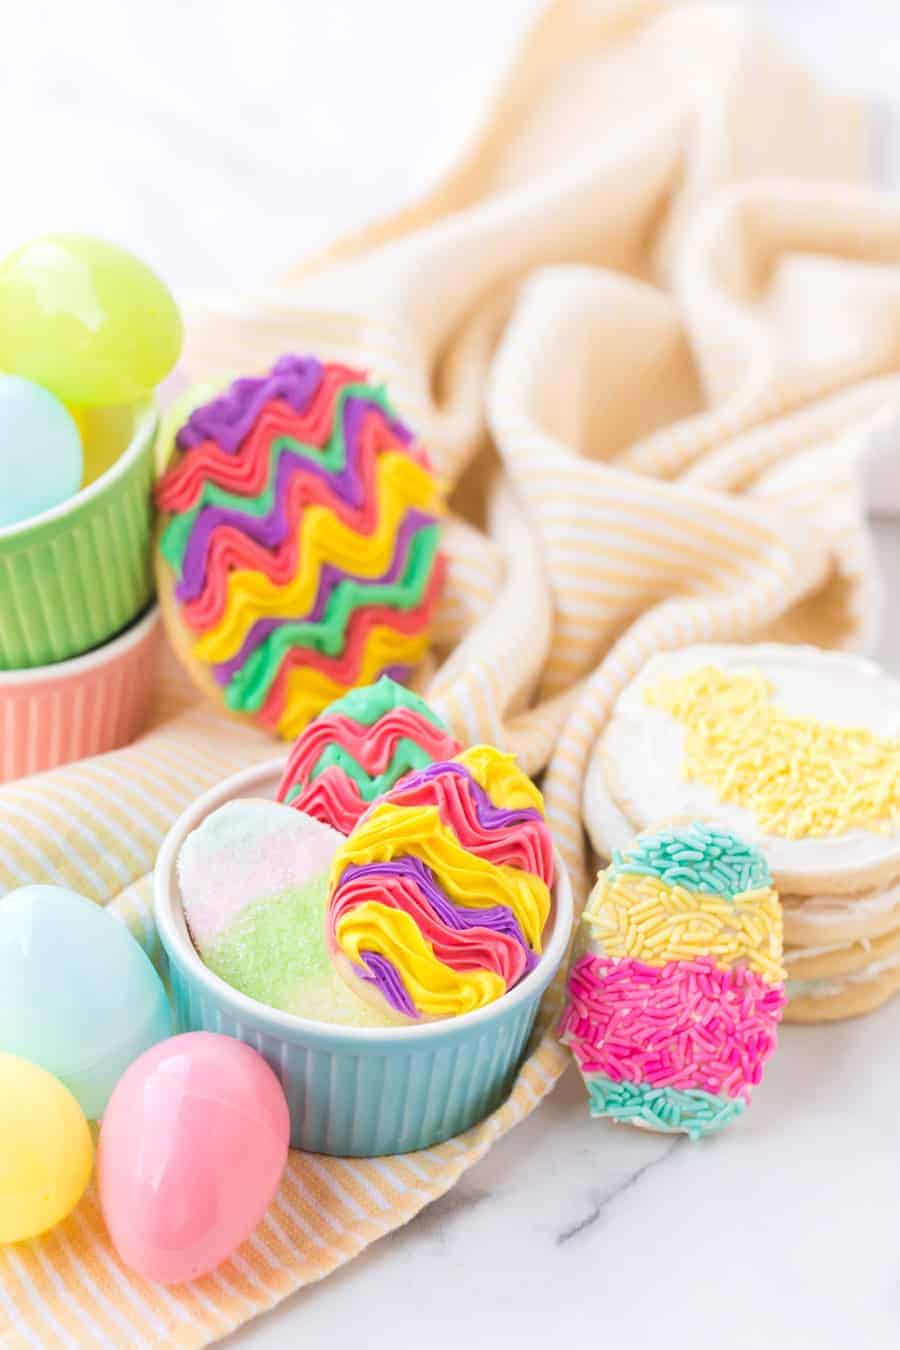 long image of iced sugar cookies and cookies with sprinkles in ramekins with plastic easter eggs on yellow and white striped towel